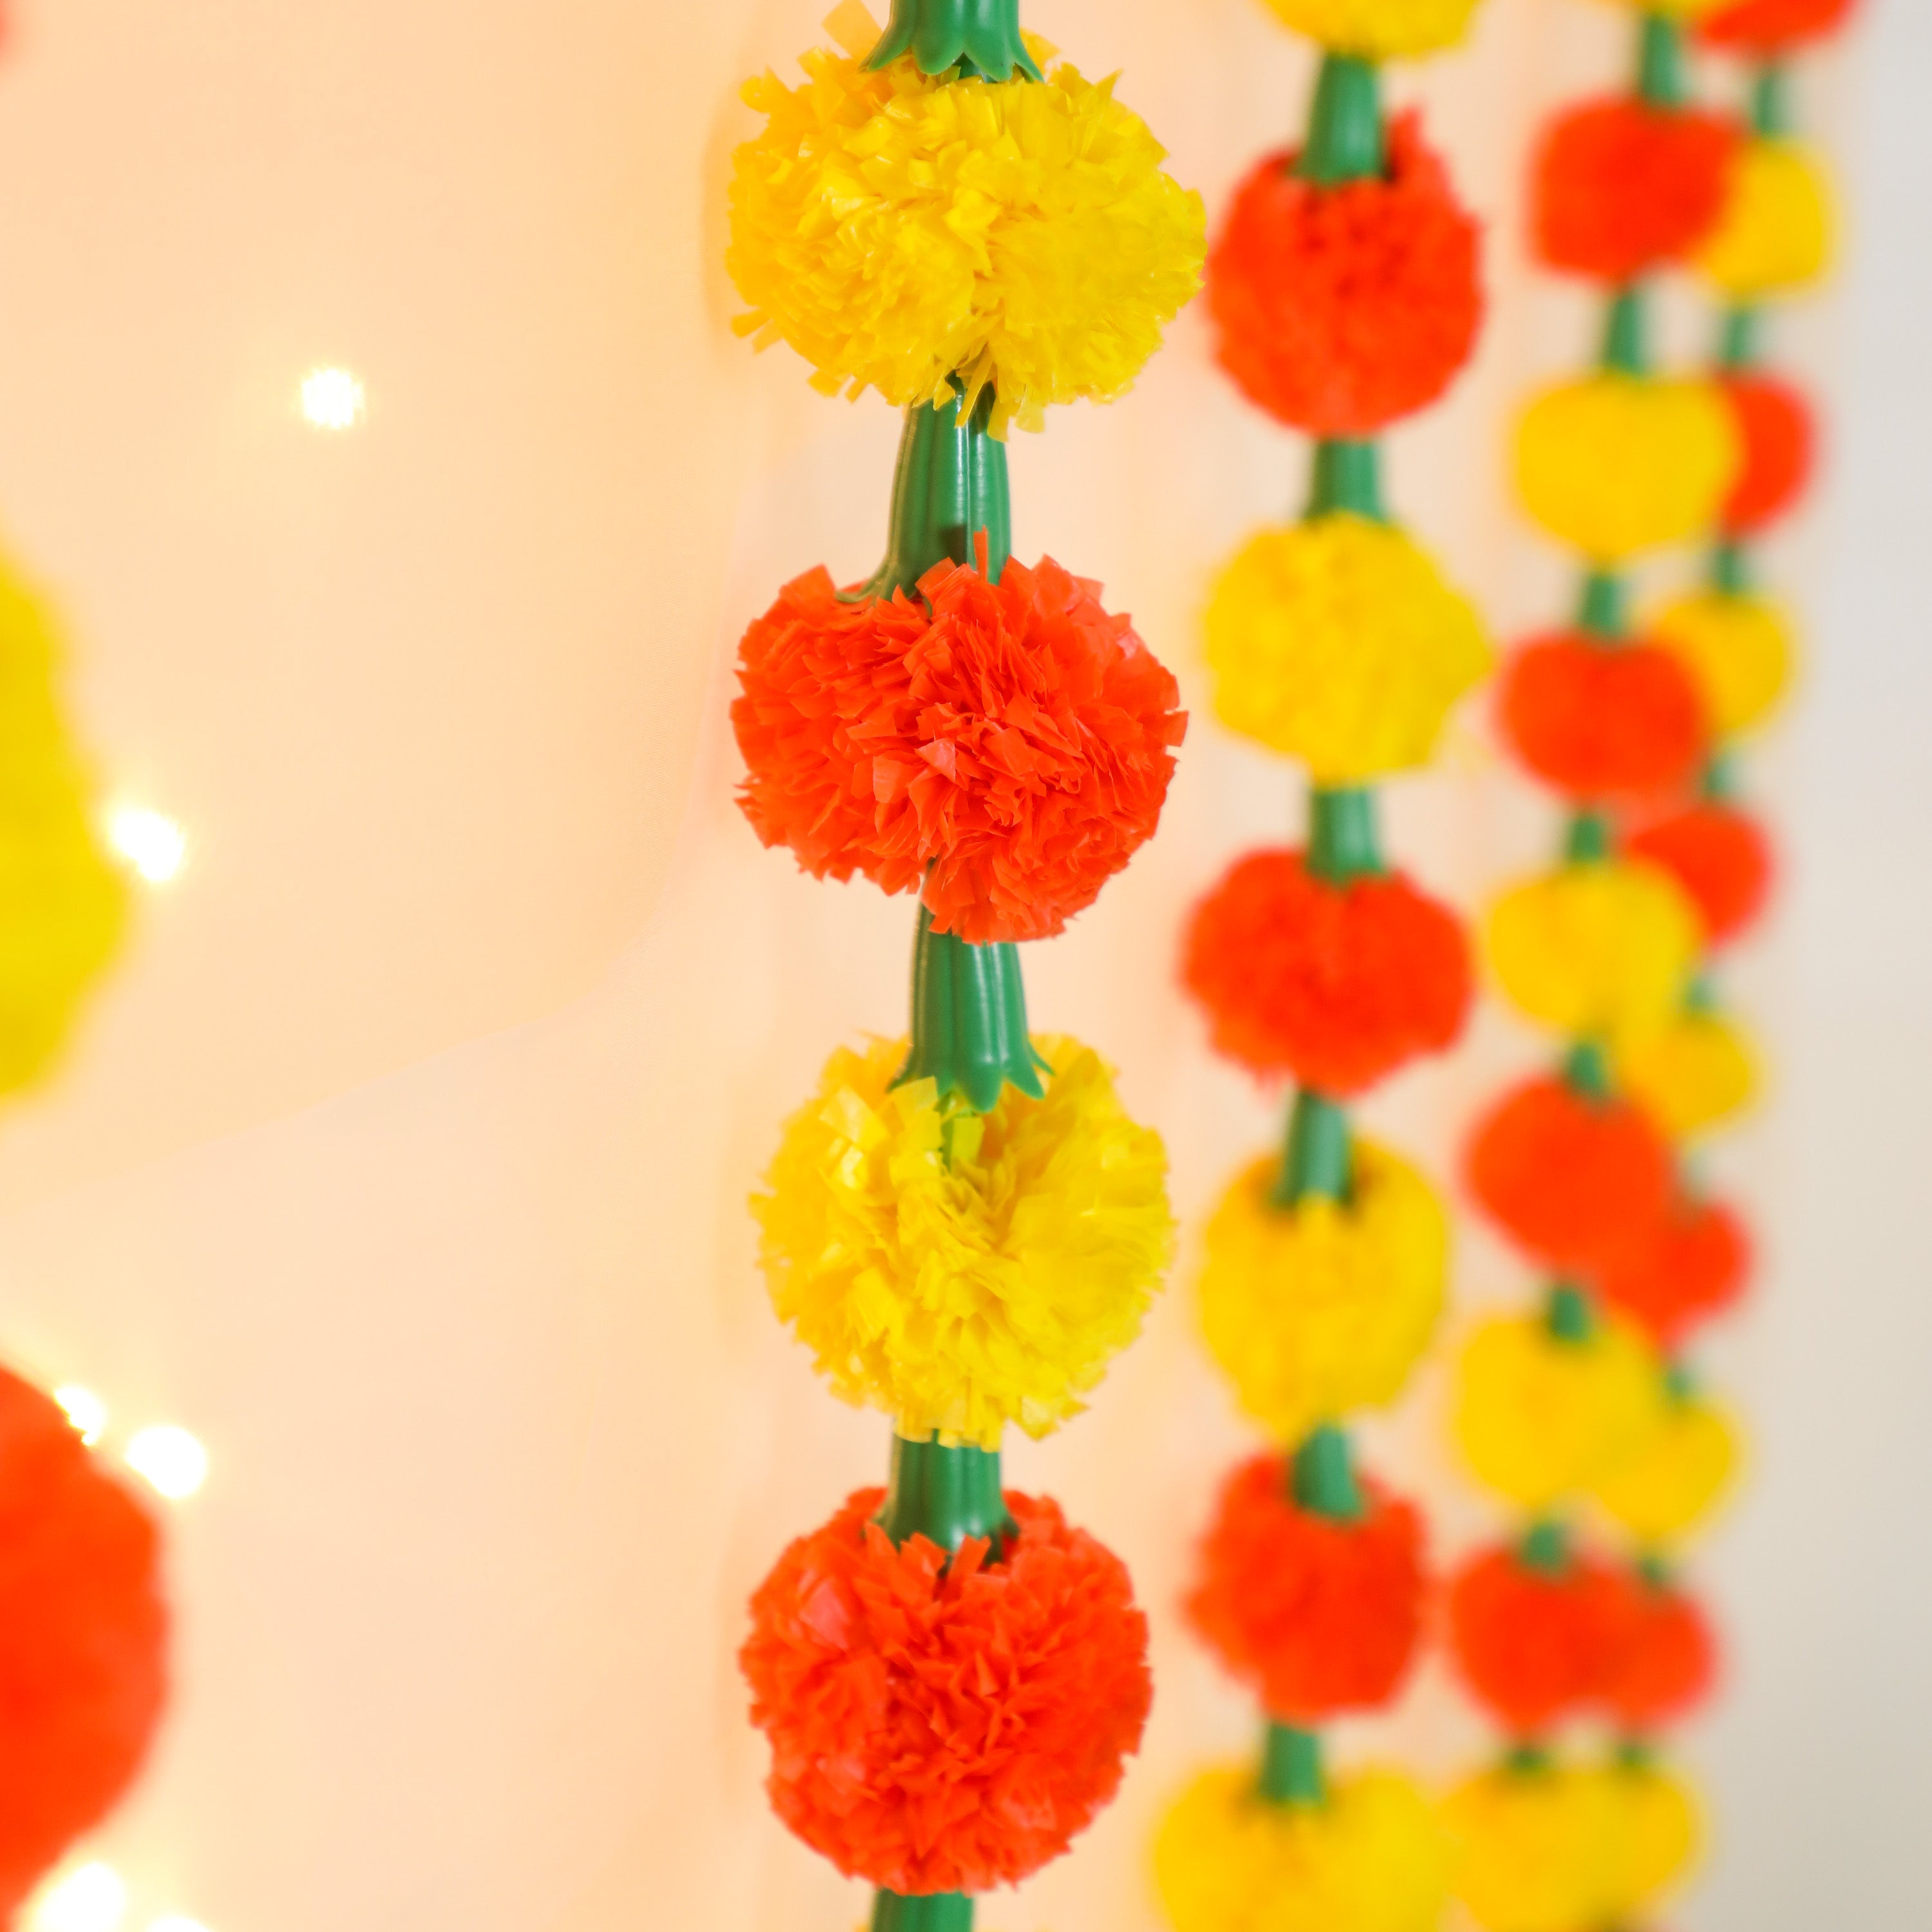 Indian Decorative Pompom Garlands with Bells from Desifavors